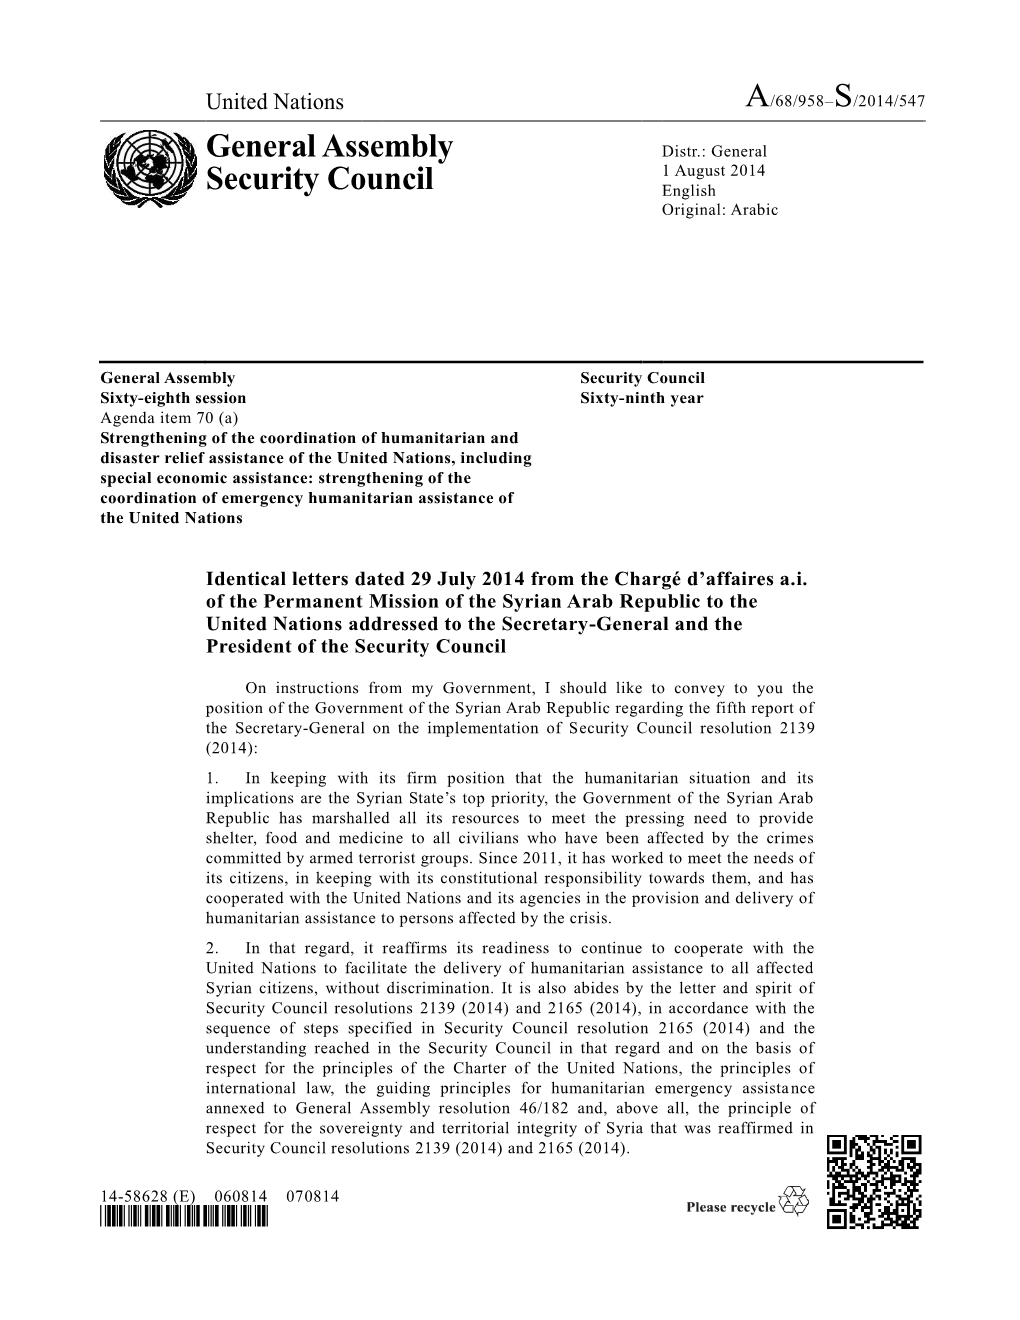 A/68/958–S/2014/547 General Assembly Security Council